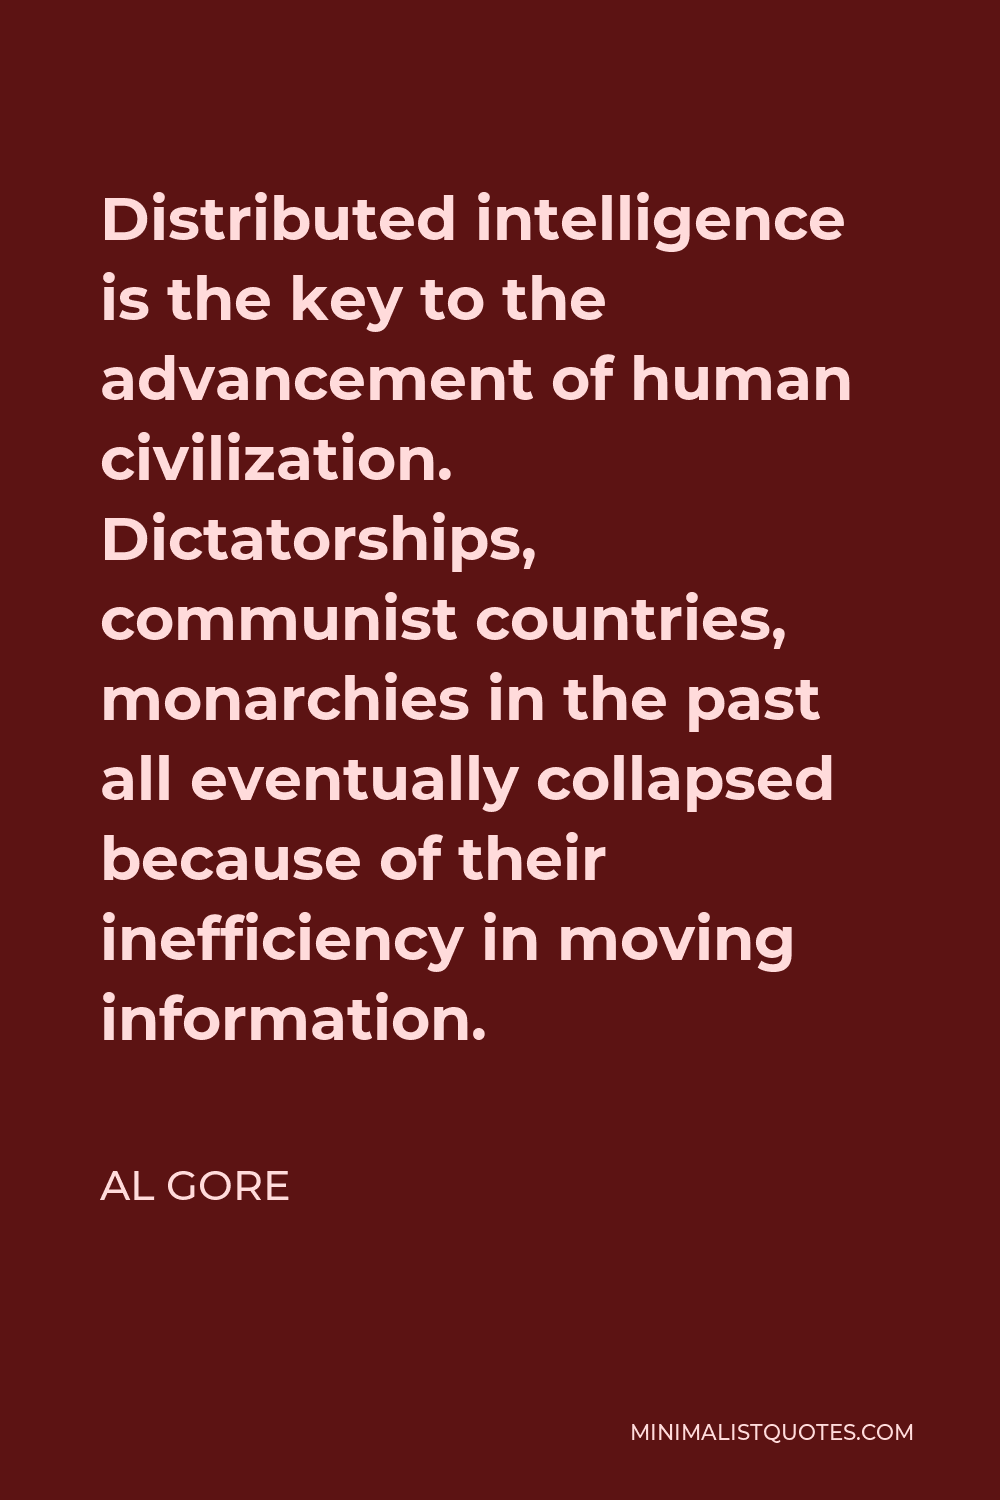 Al Gore Quote - Distributed intelligence is the key to the advancement of human civilization. Dictatorships, communist countries, monarchies in the past all eventually collapsed because of their inefficiency in moving information.